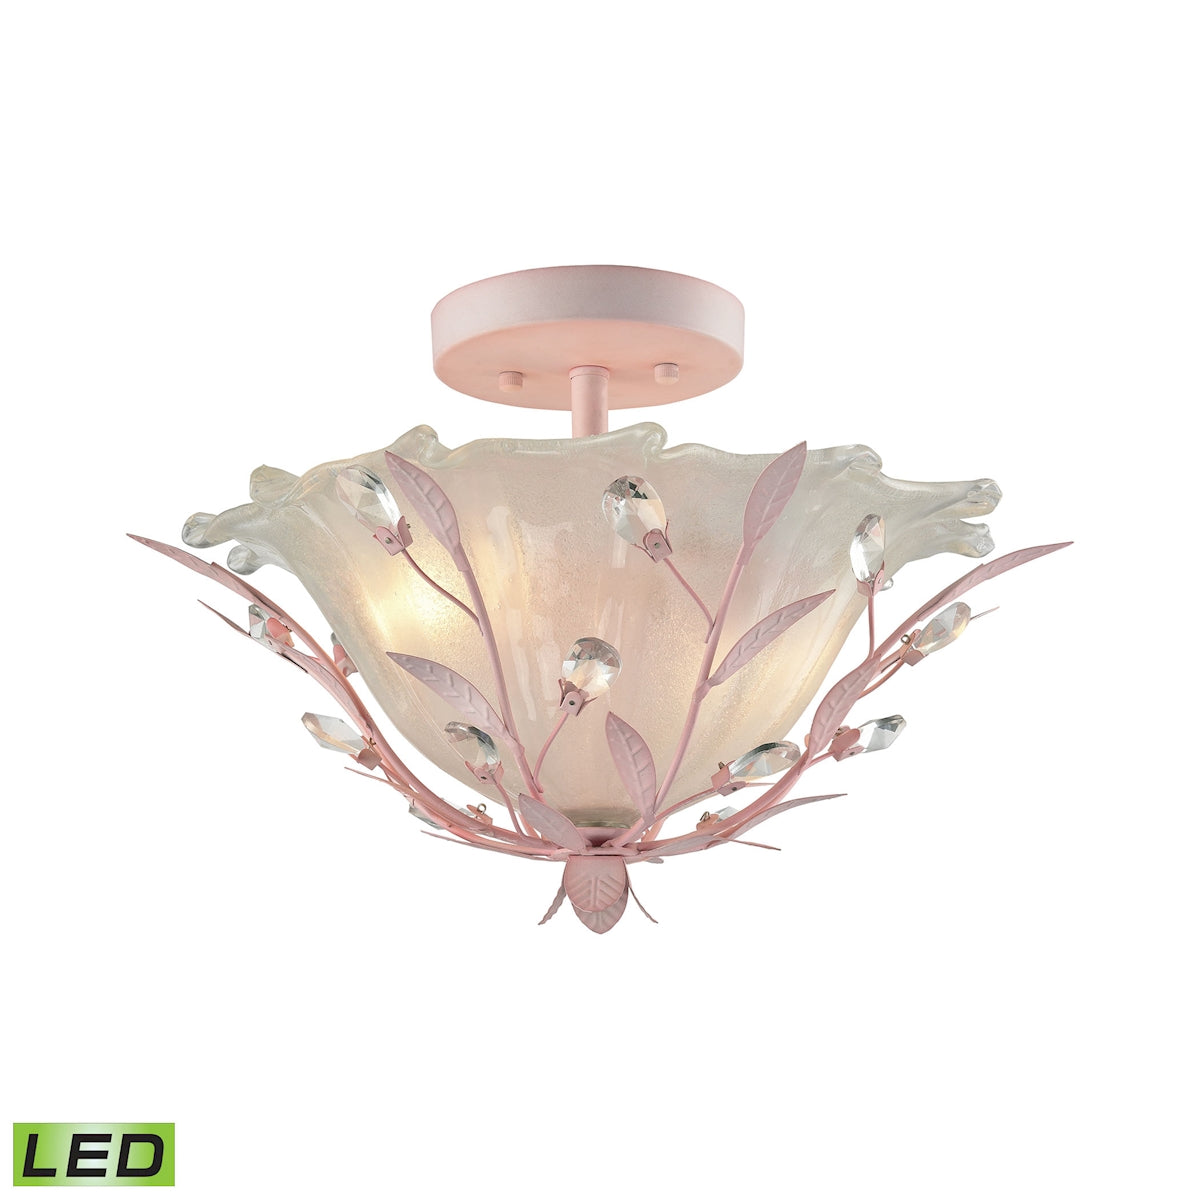 ELK Lighting 18151/2-LED Circeo 2-Light Semi Flush in Light Pink with Frosted Hand-formed Glass - Includes LED Bulbs